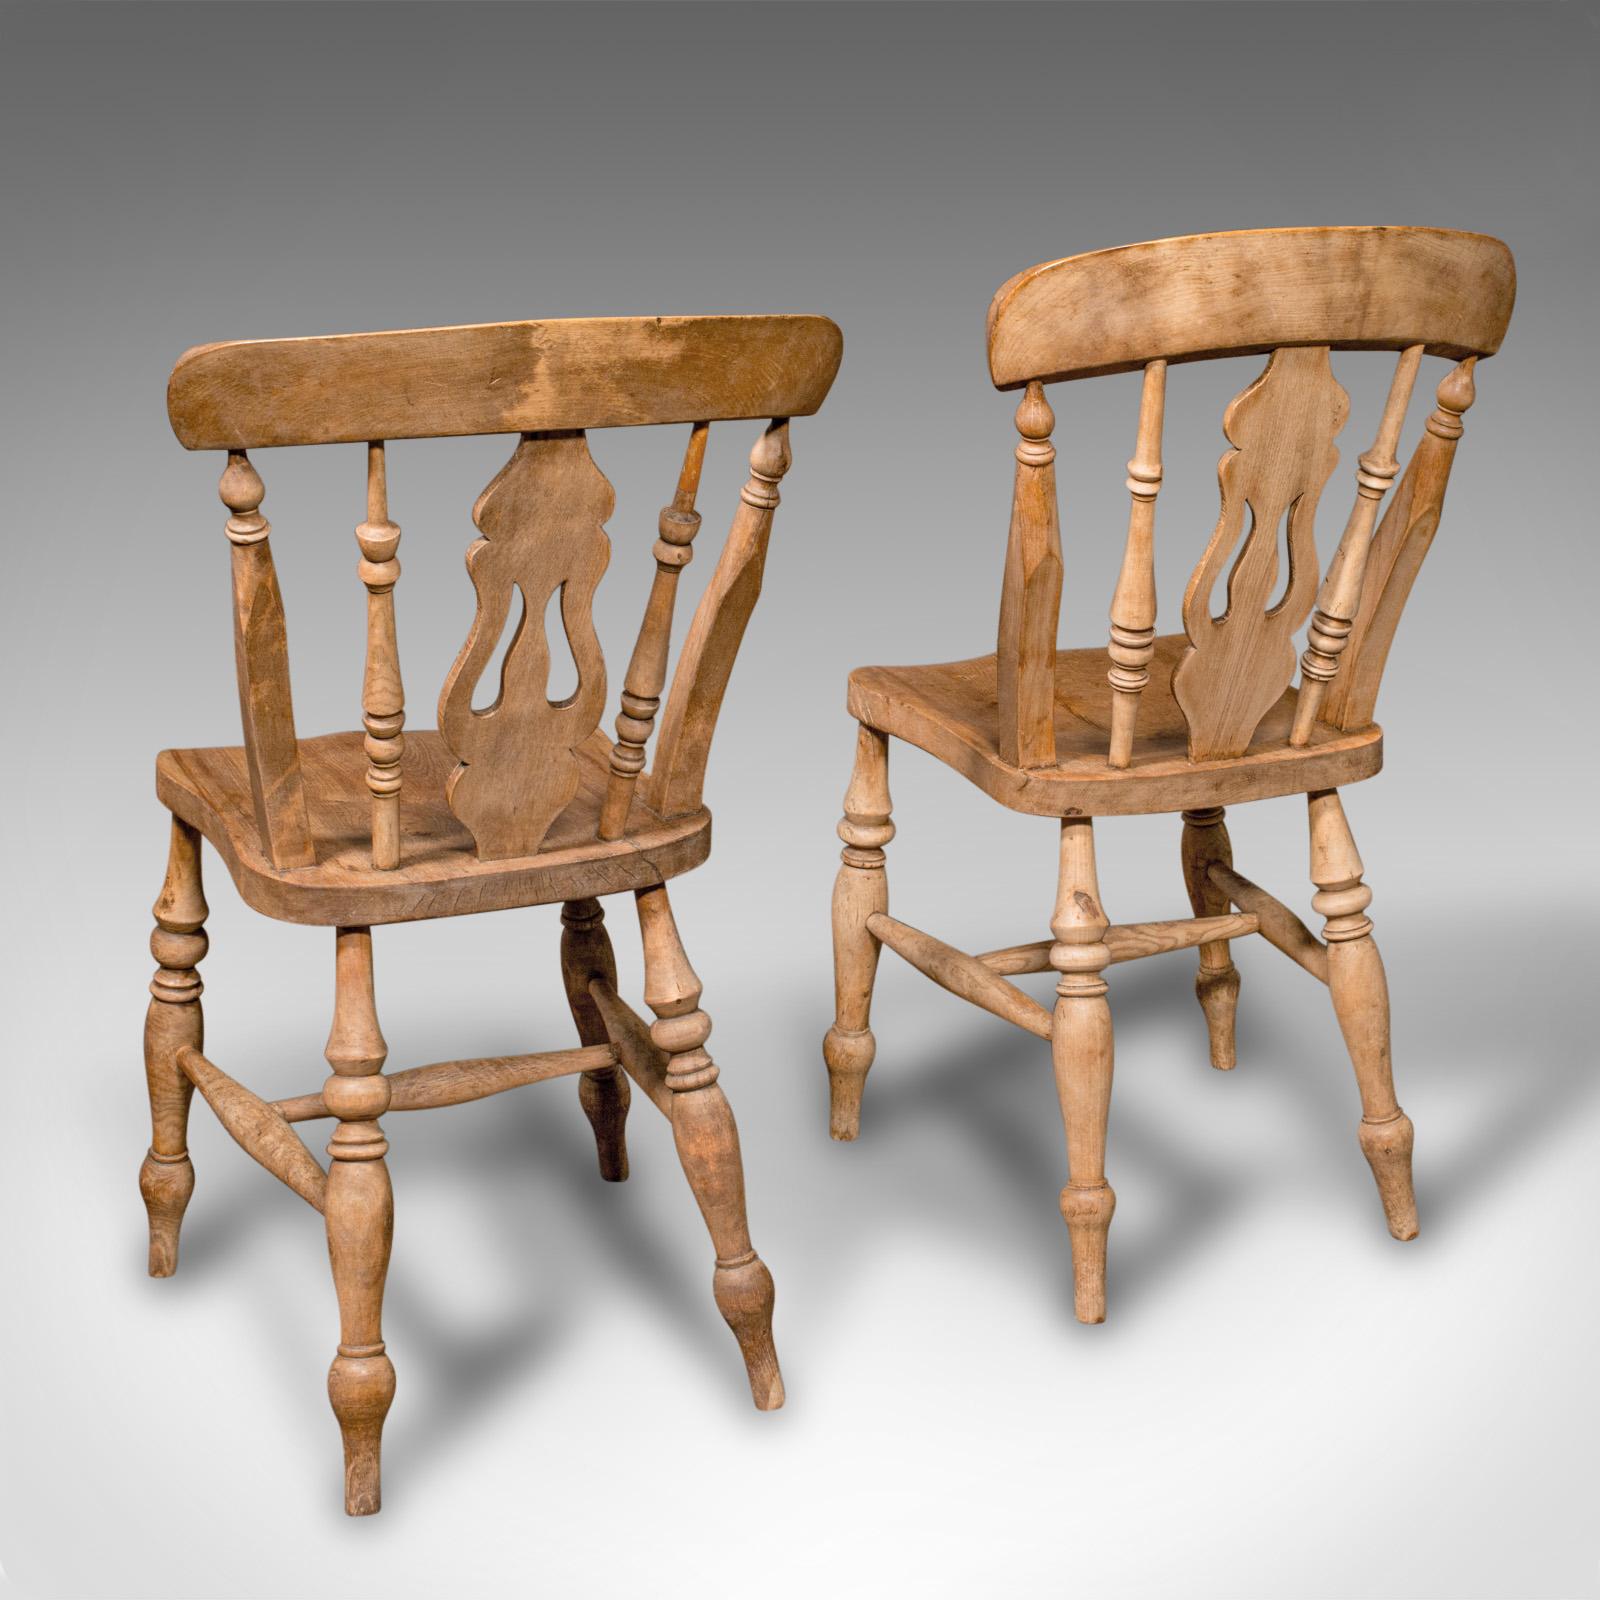 Set Of 4 Antique Dining Chairs, English Elm, Beech, Kitchen, Reception Hall Seat In Good Condition For Sale In Hele, Devon, GB